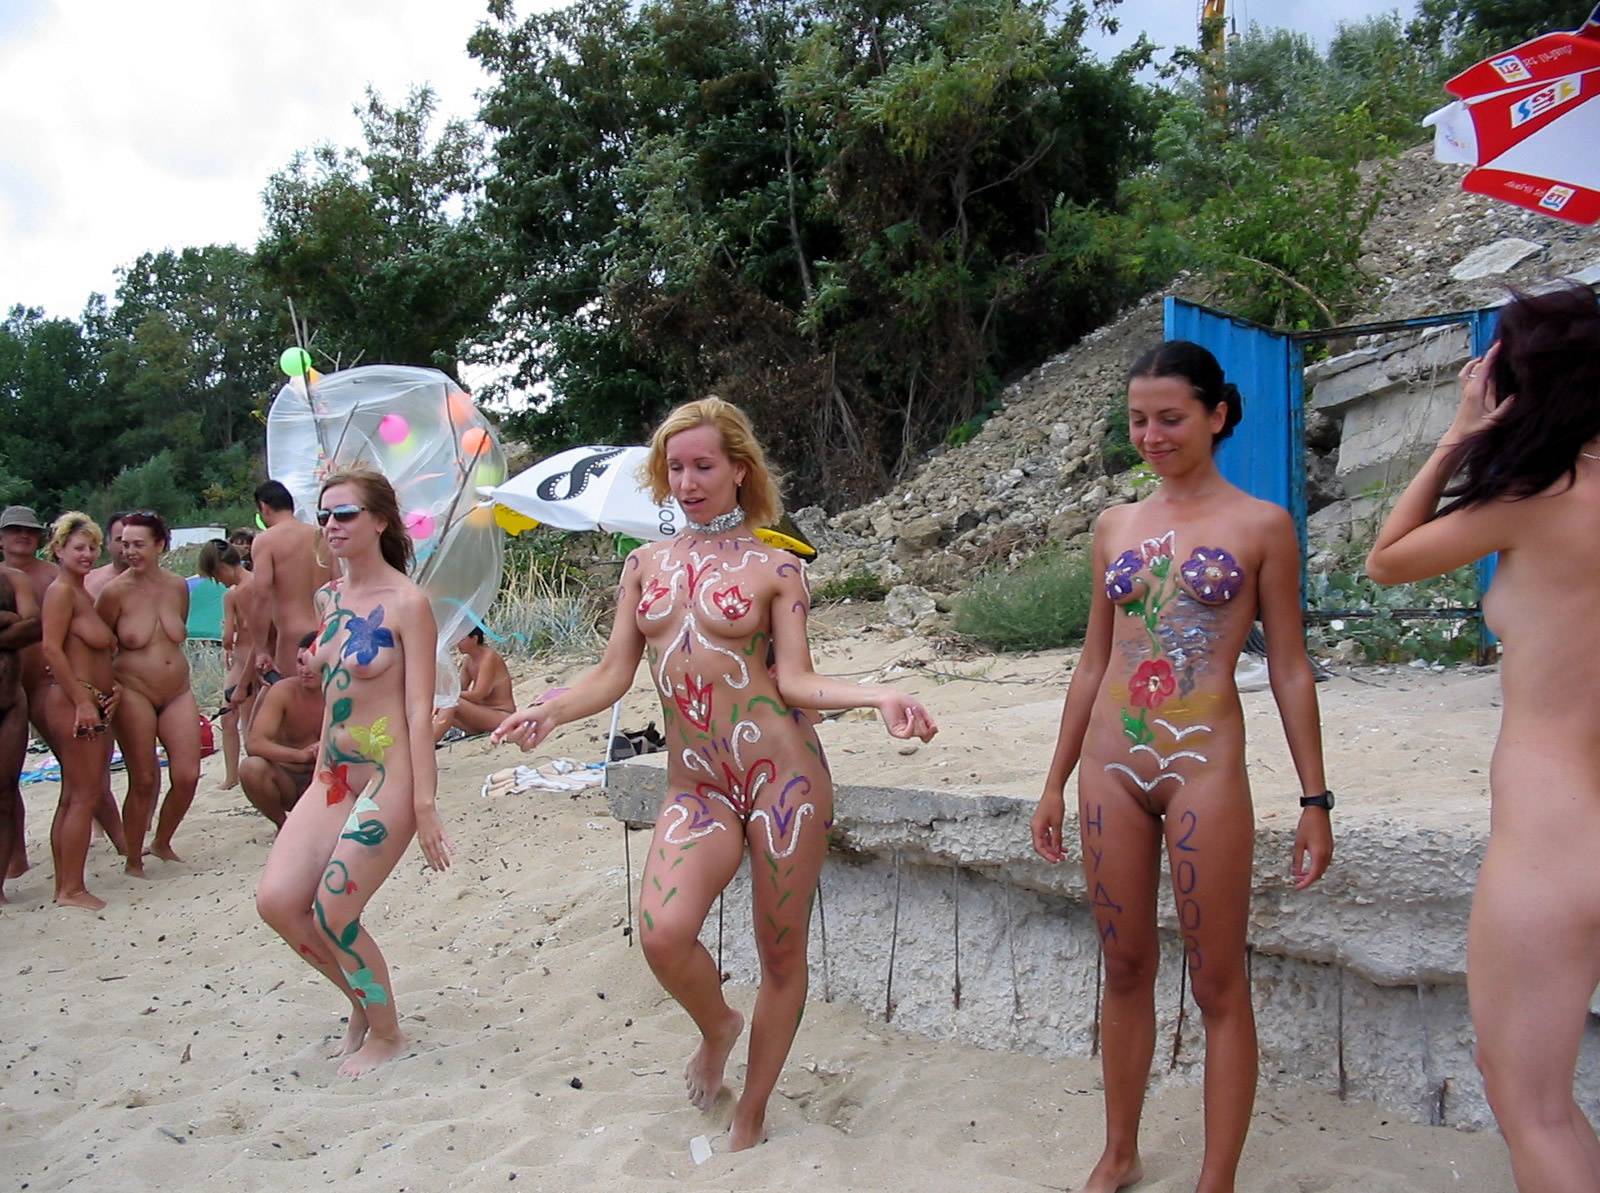 Vibrant expression of naturism: Women adorned with captivating body painting, dancing on the sand